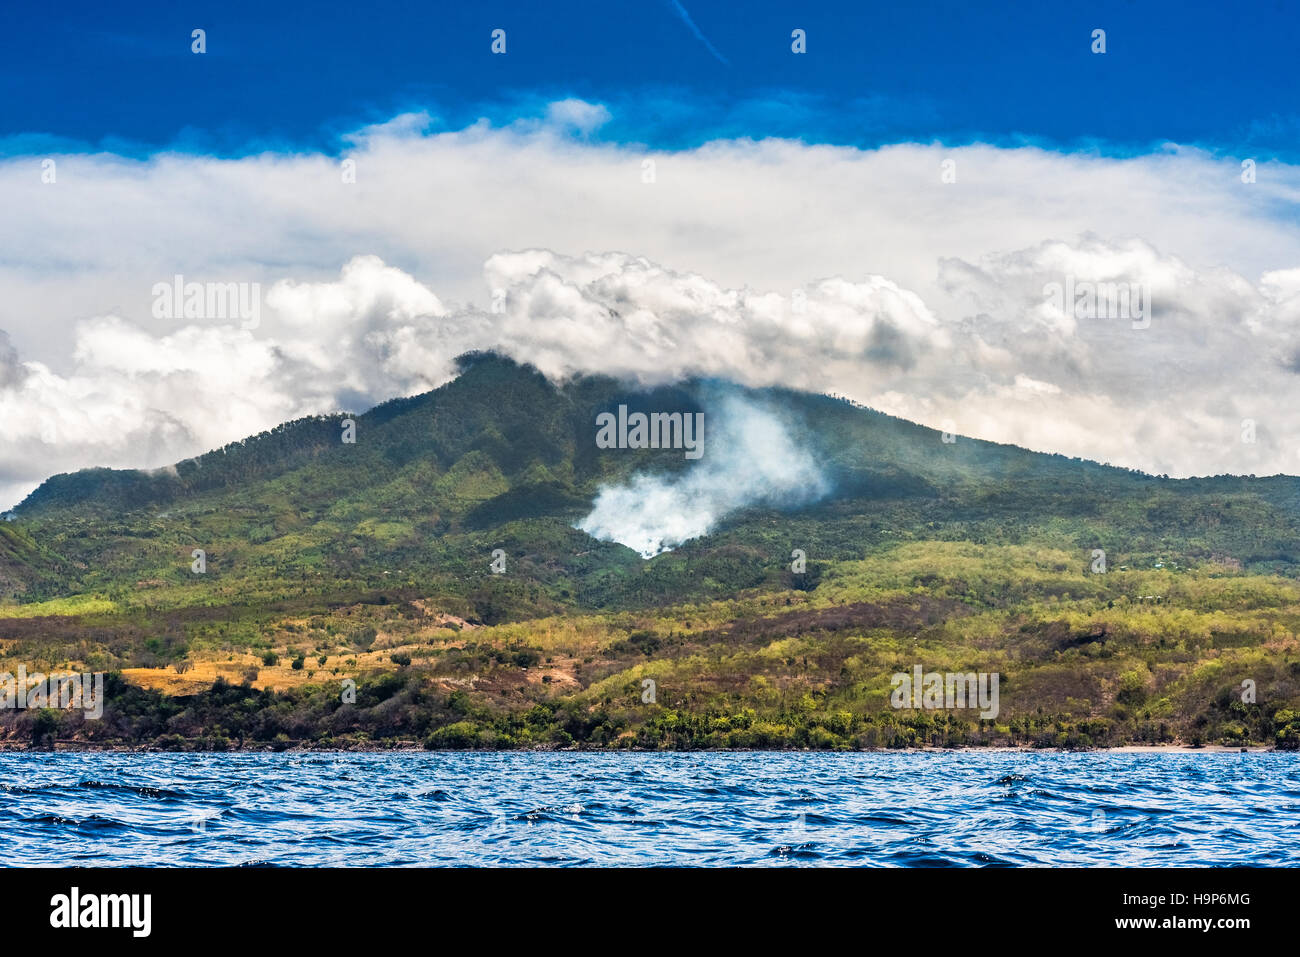 Smoke from forest fire on the slope of Mount Ili Labalekang is seen from sea water off the coast of Wulandoni, Lembata, East Nusa Tenggara, Indonesia. Stock Photo